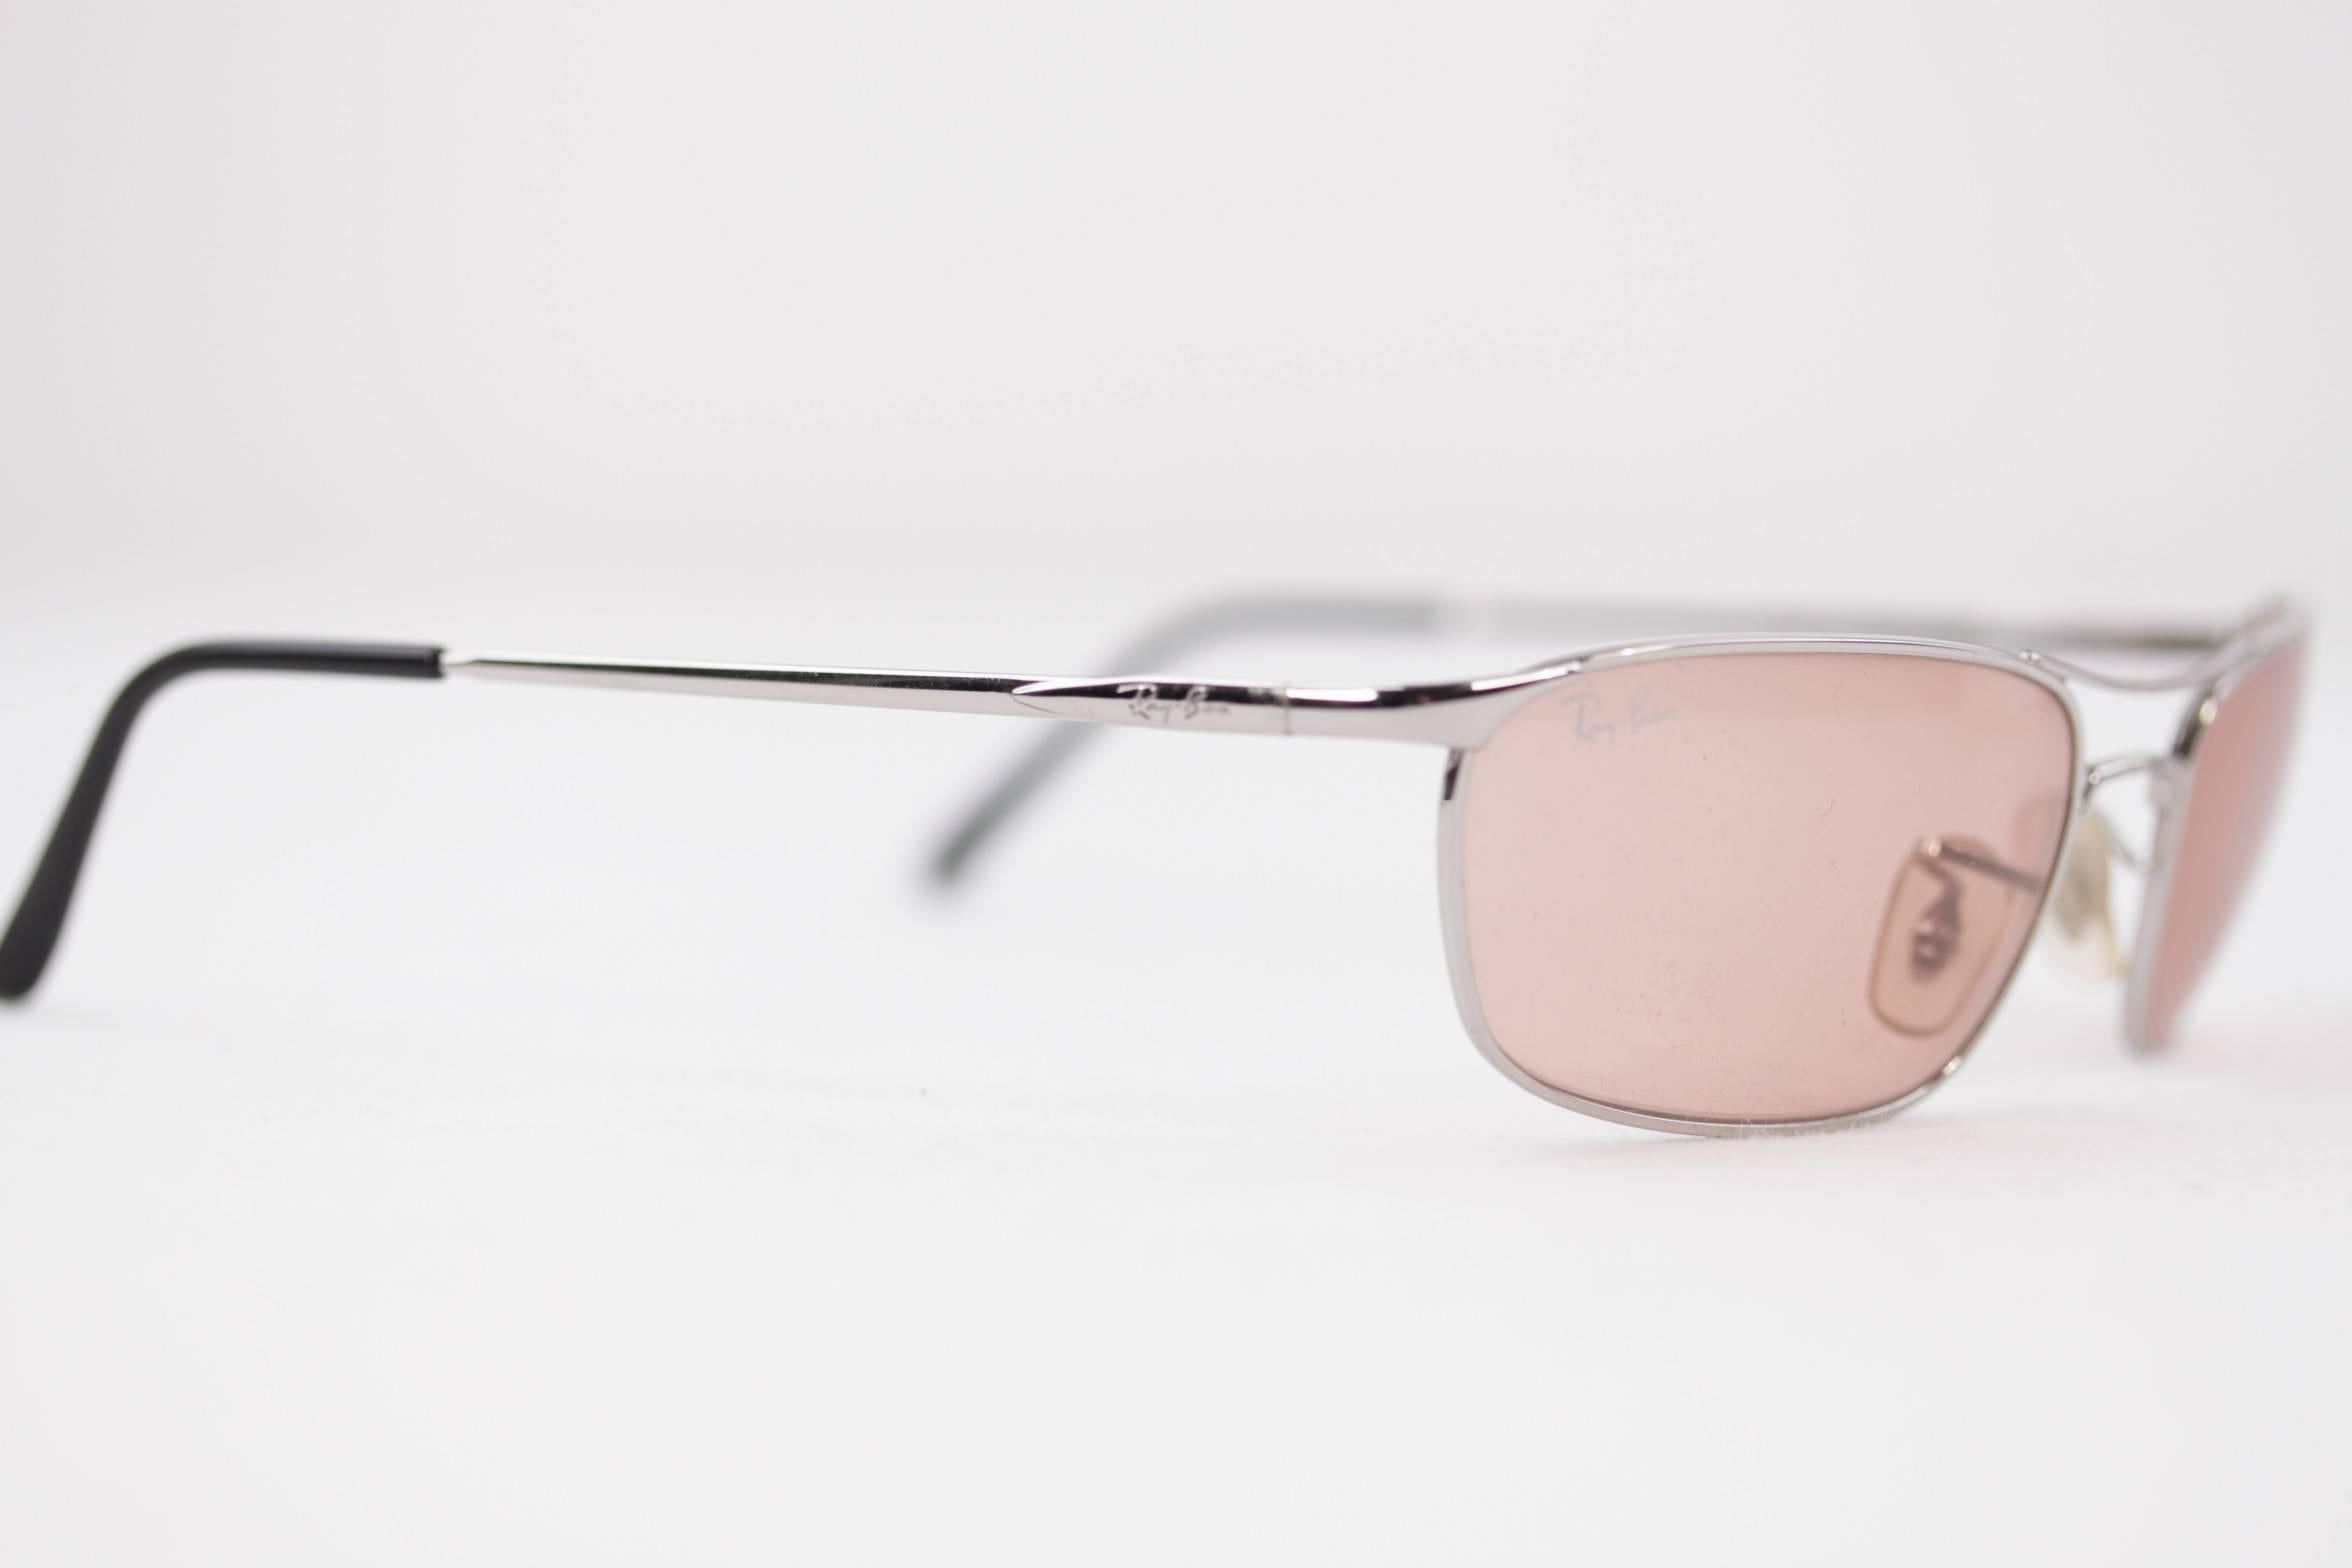 - Model: RB 3132 - 003/50 - 54/18

- Vintage stock, hardly any wear. Please follow reading for details

- Silver metal frame, with black plastic arm ends, RB etched on nose pads

- FLEX-HINGES, Frame made in Italy

- Original RAY BAN Pink